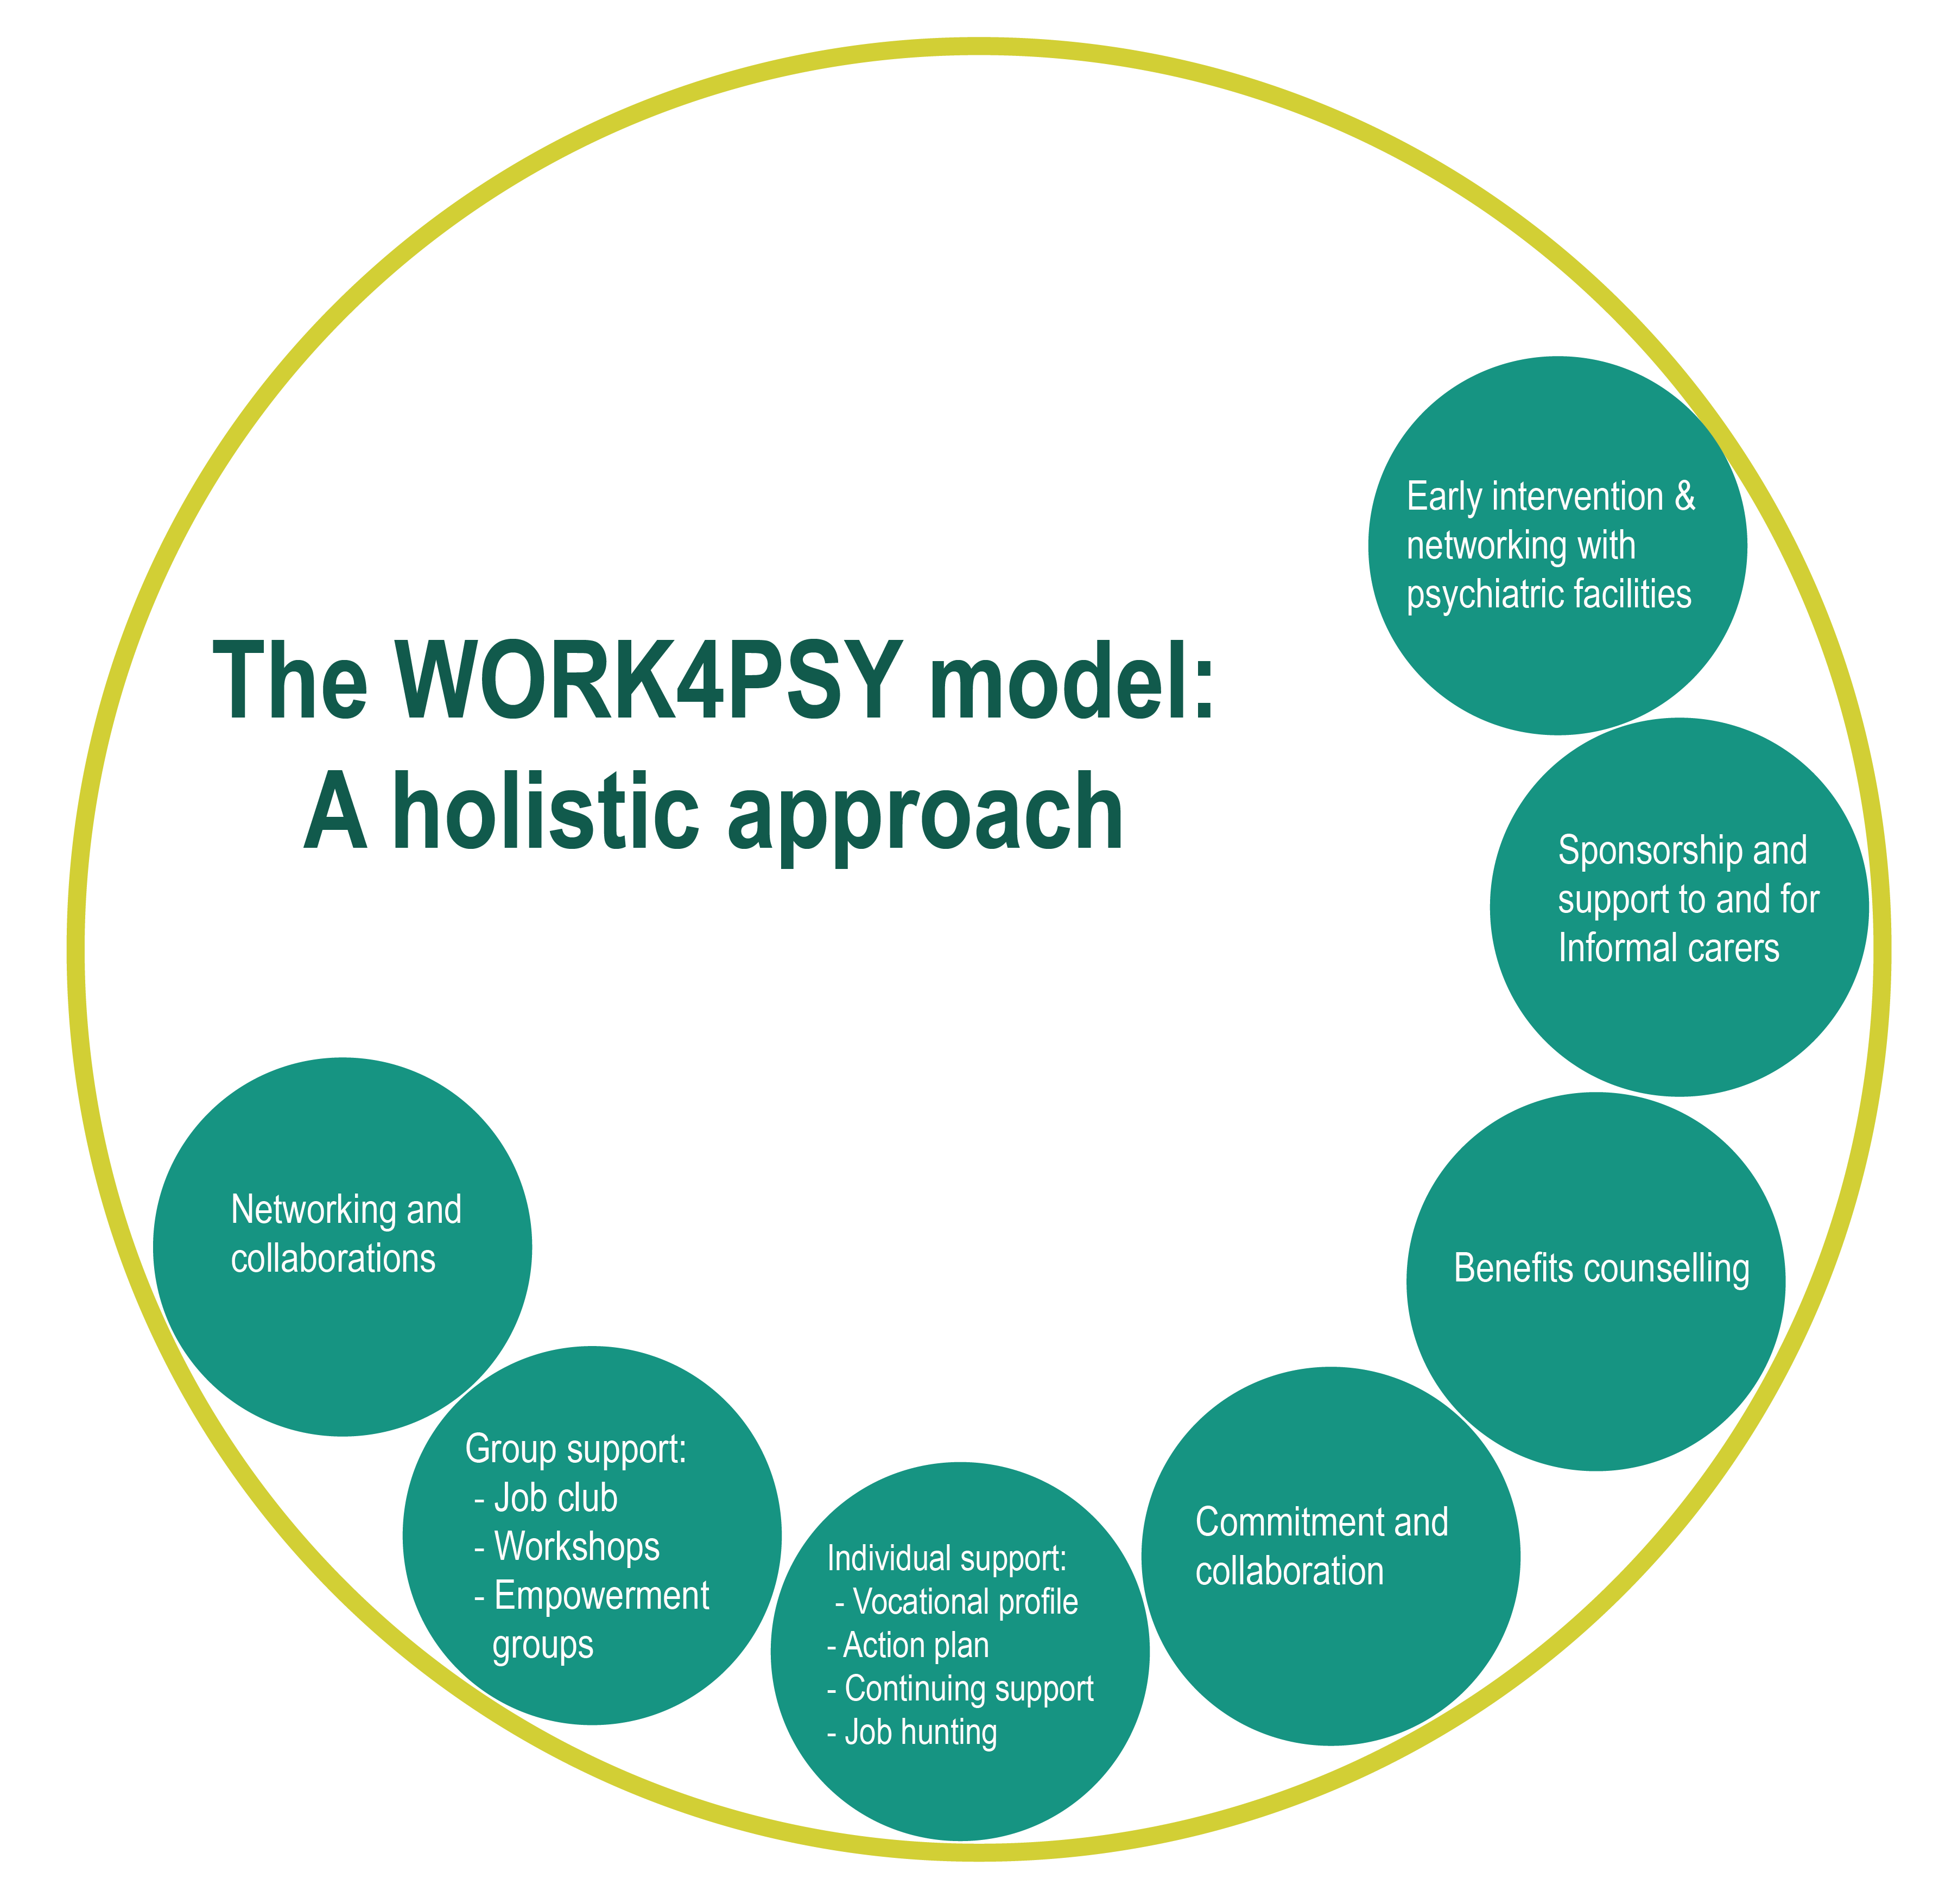 The Work4psy model: a holistic approach